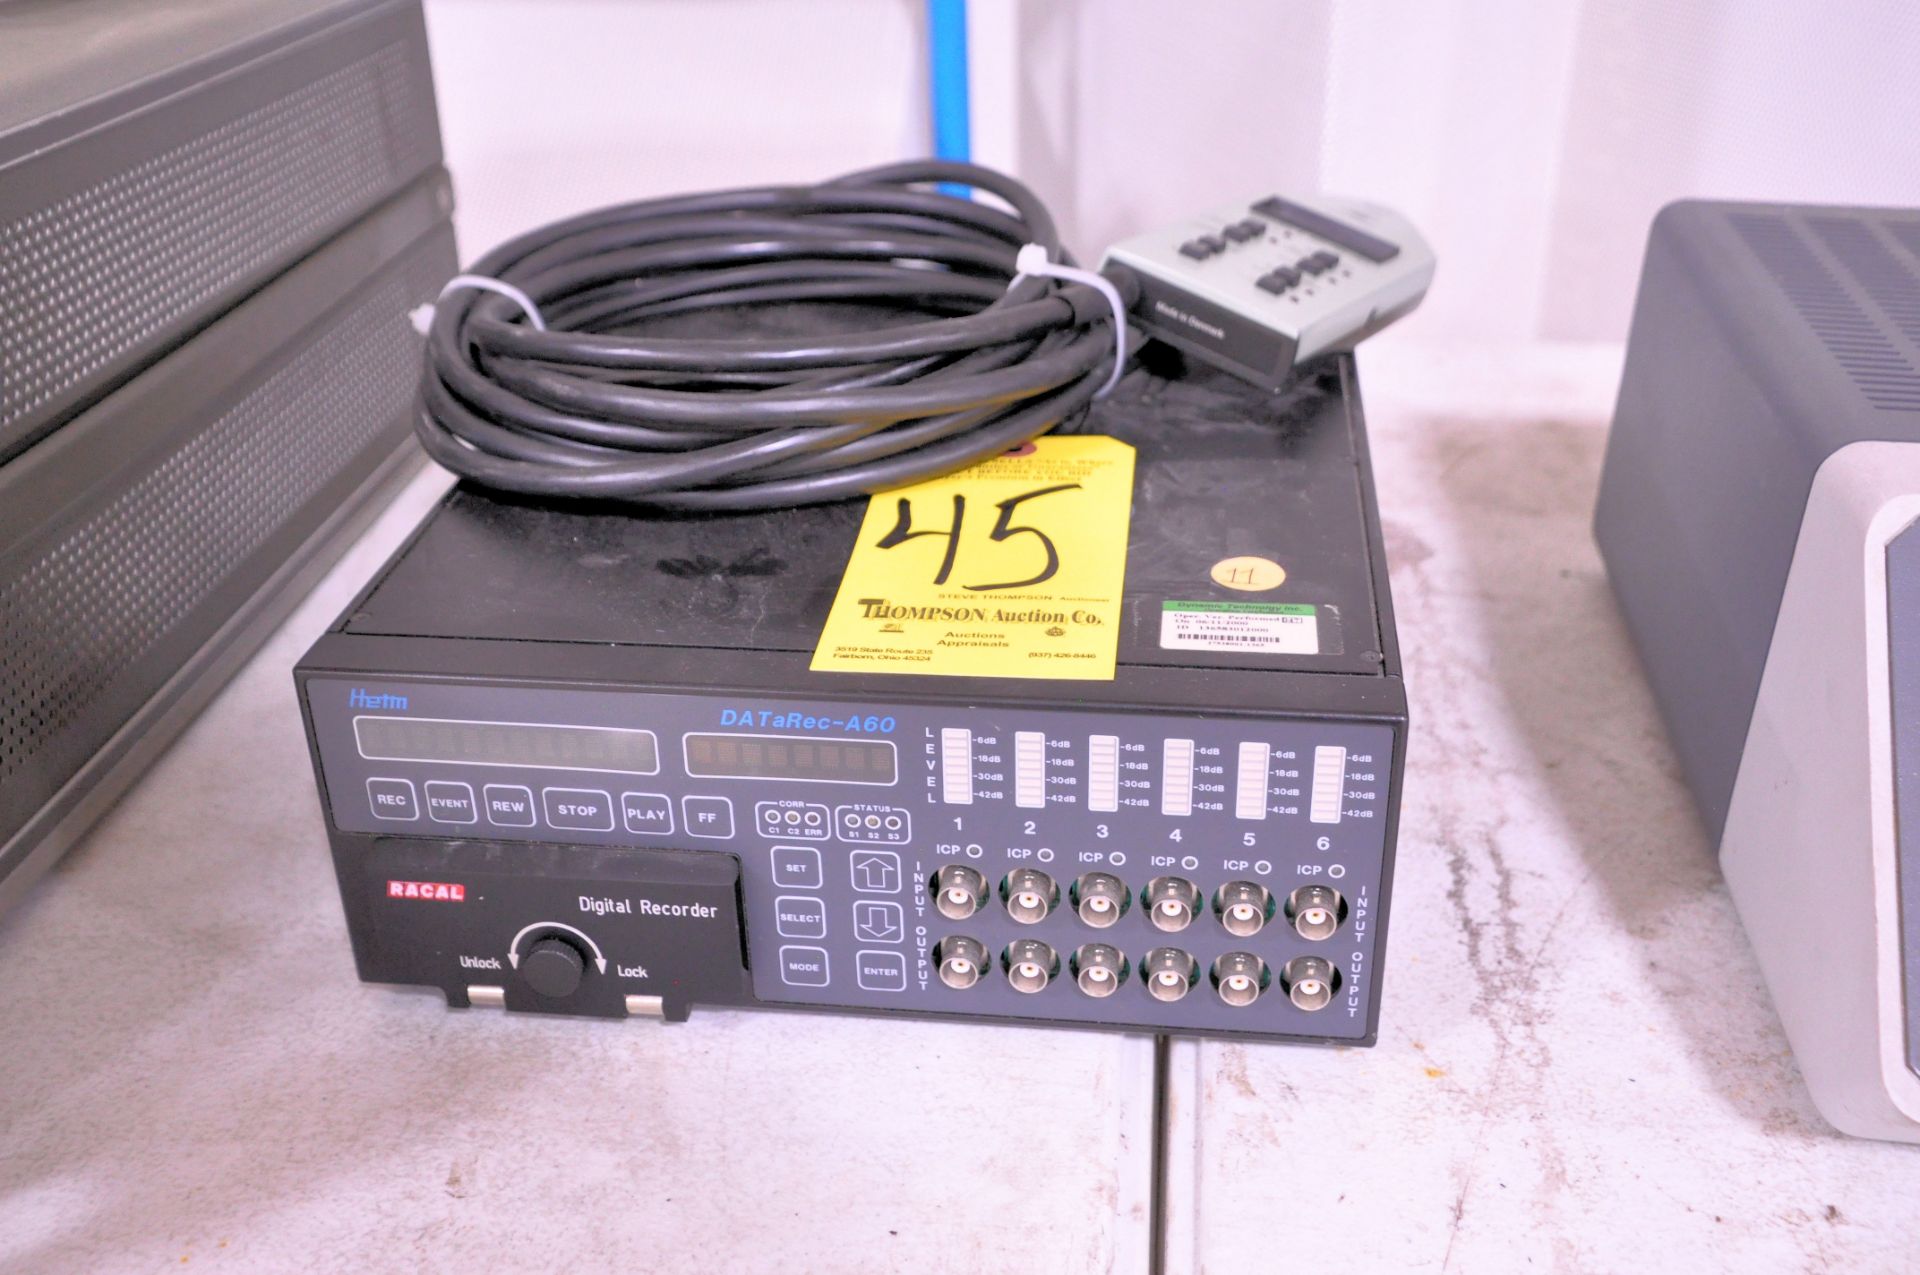 Helm Type DATaRec-A60 Digital Recorder with Bruel & Kjaer Type ZH-0354 Remote Control Unit